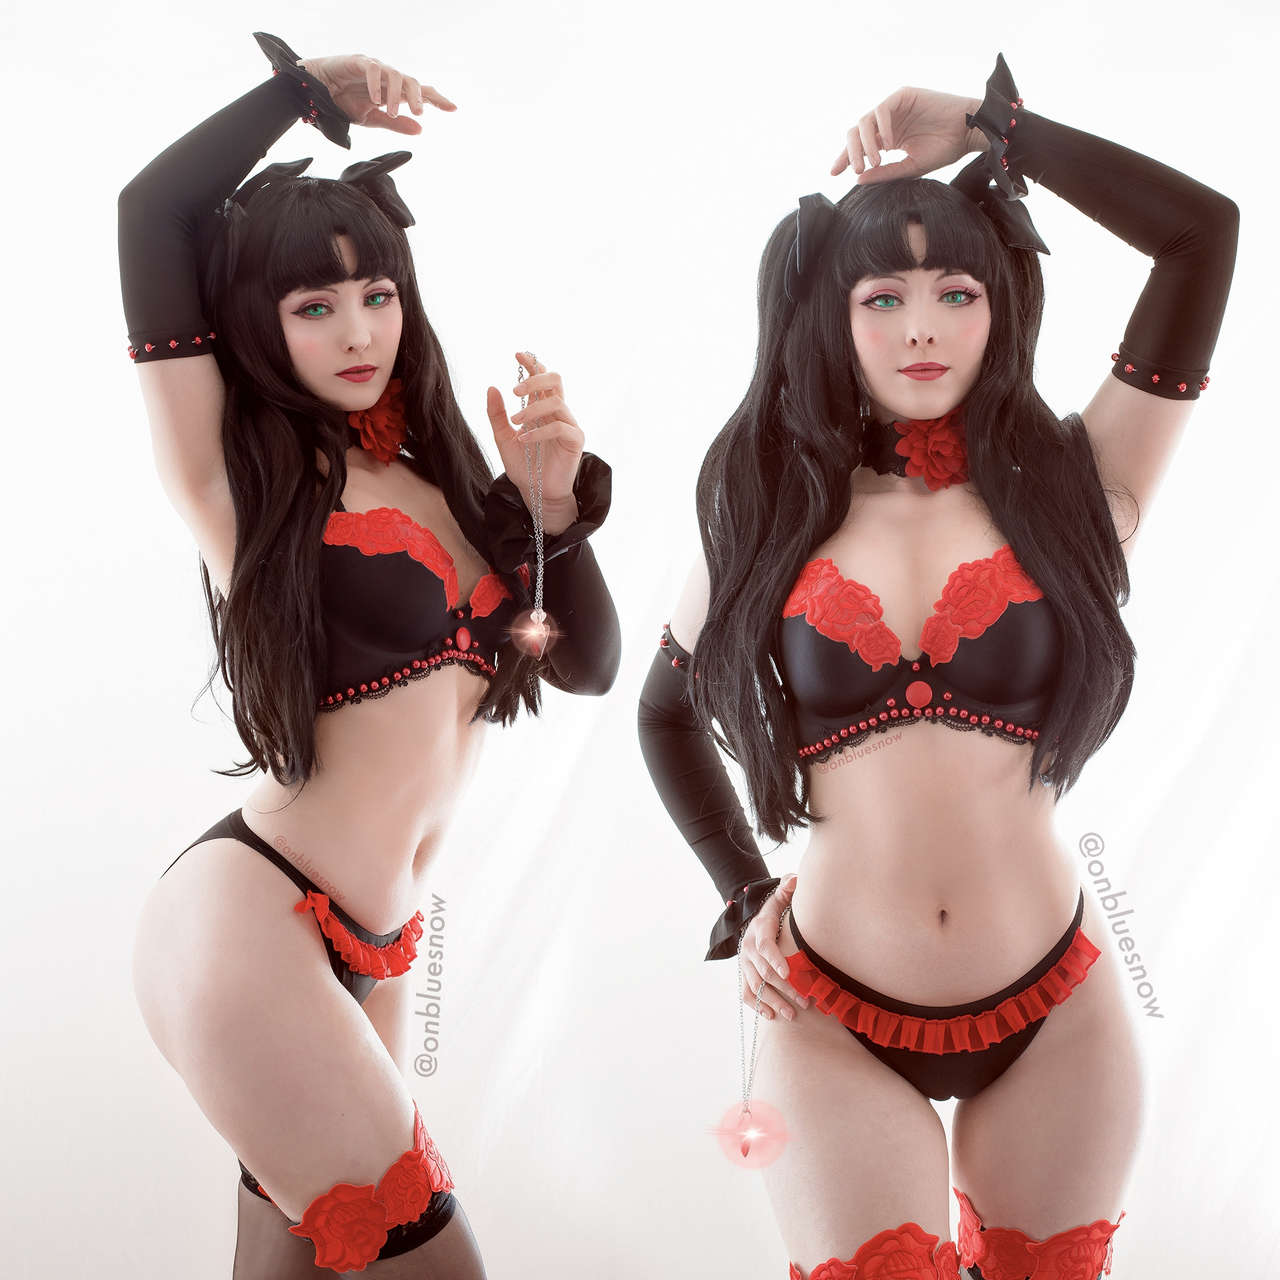 Self Rin Tohsaka Official Lingerie By Onbluesno